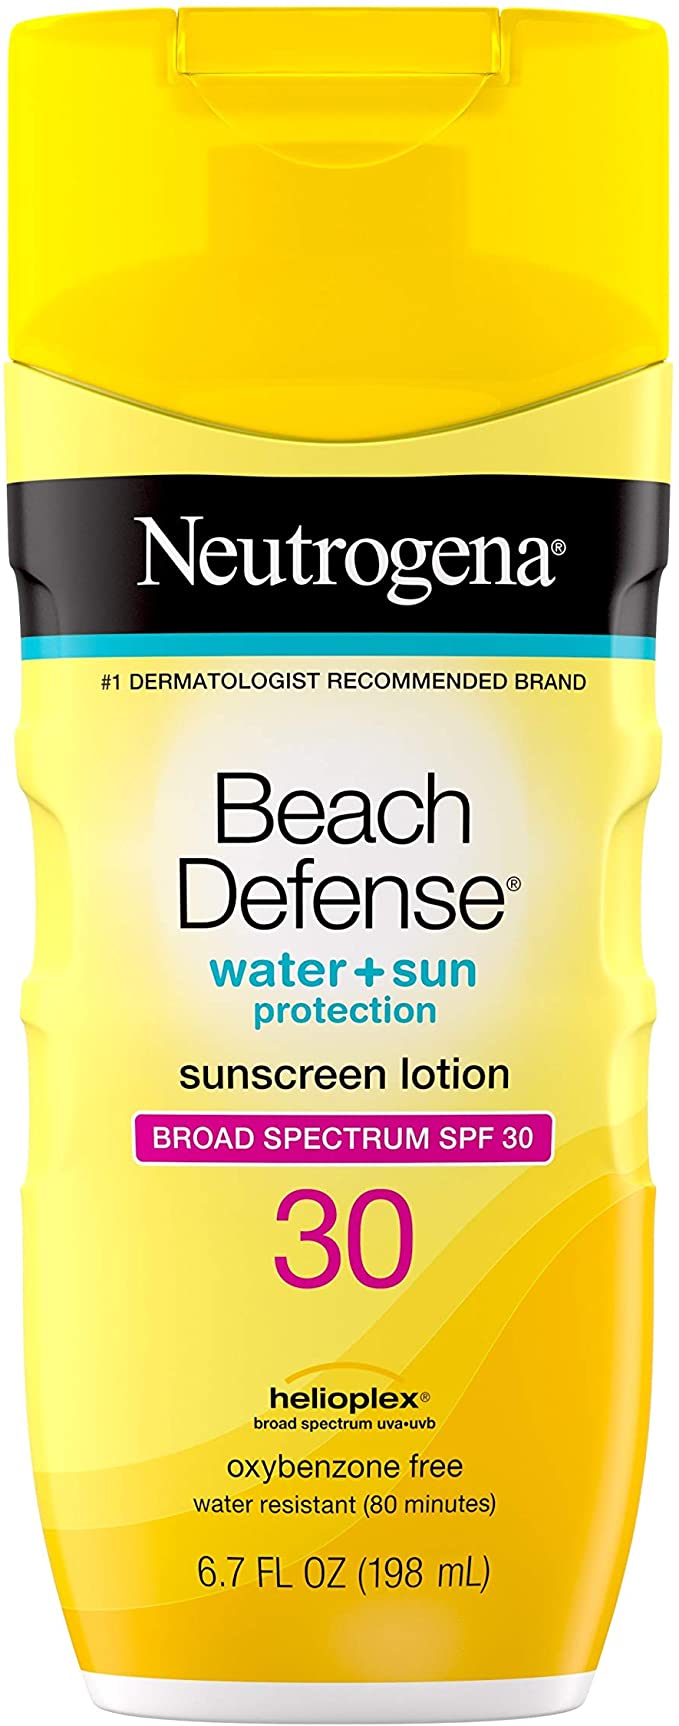 Neutrogena Beach Defense Water Resistant Sunscreen Body Lotion with Broad Spectrum SPF 30, Oil-Free and Fast-Absorbing, 6.7 oz